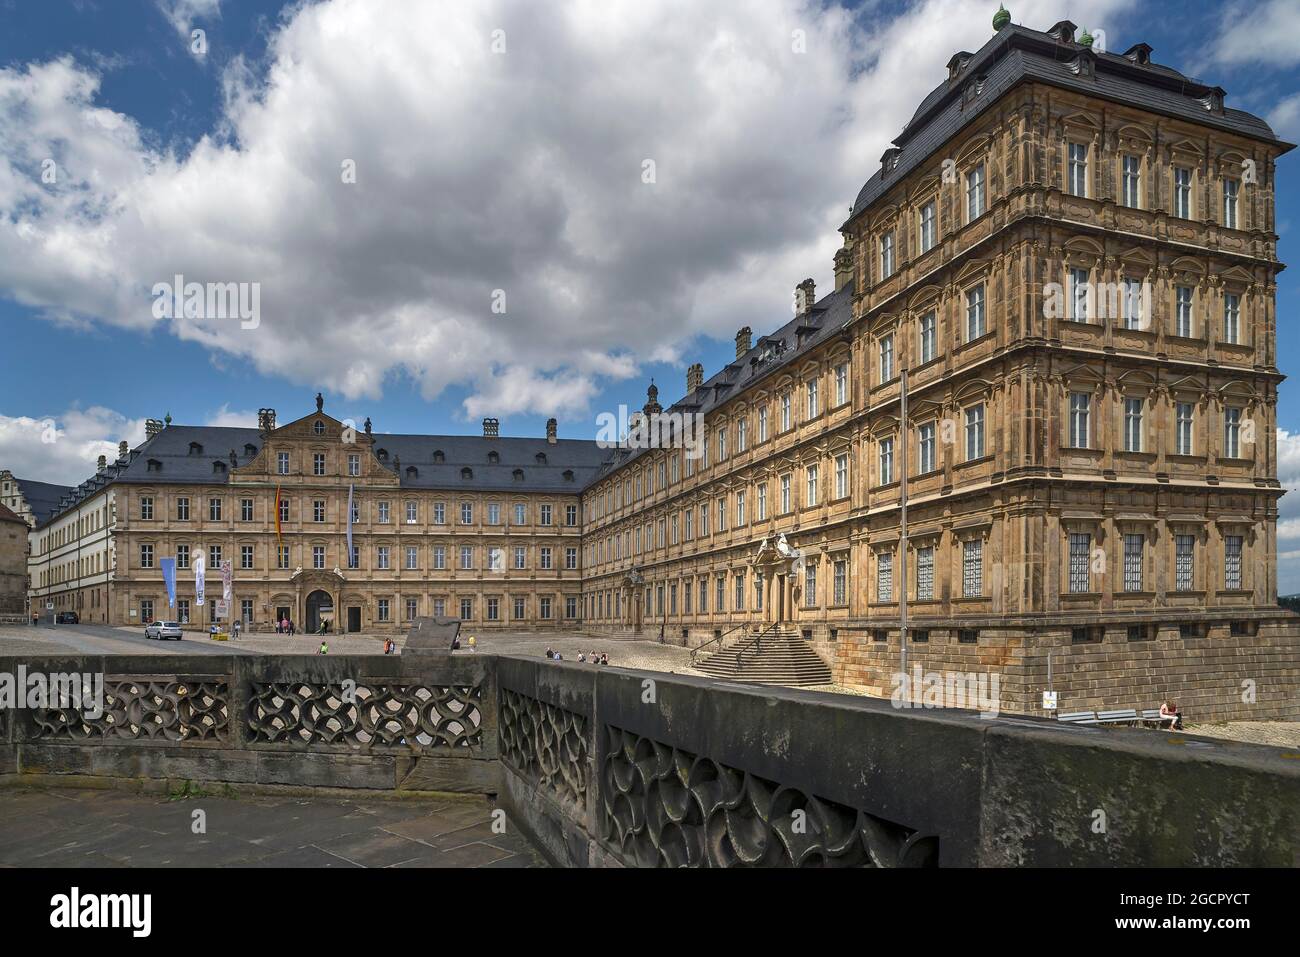 New Residence, built in 1602, in Renaissance style and extended in 1703 in Baroque style, Bamberg, Upper Franconia, Bavaria, Germany Stock Photo